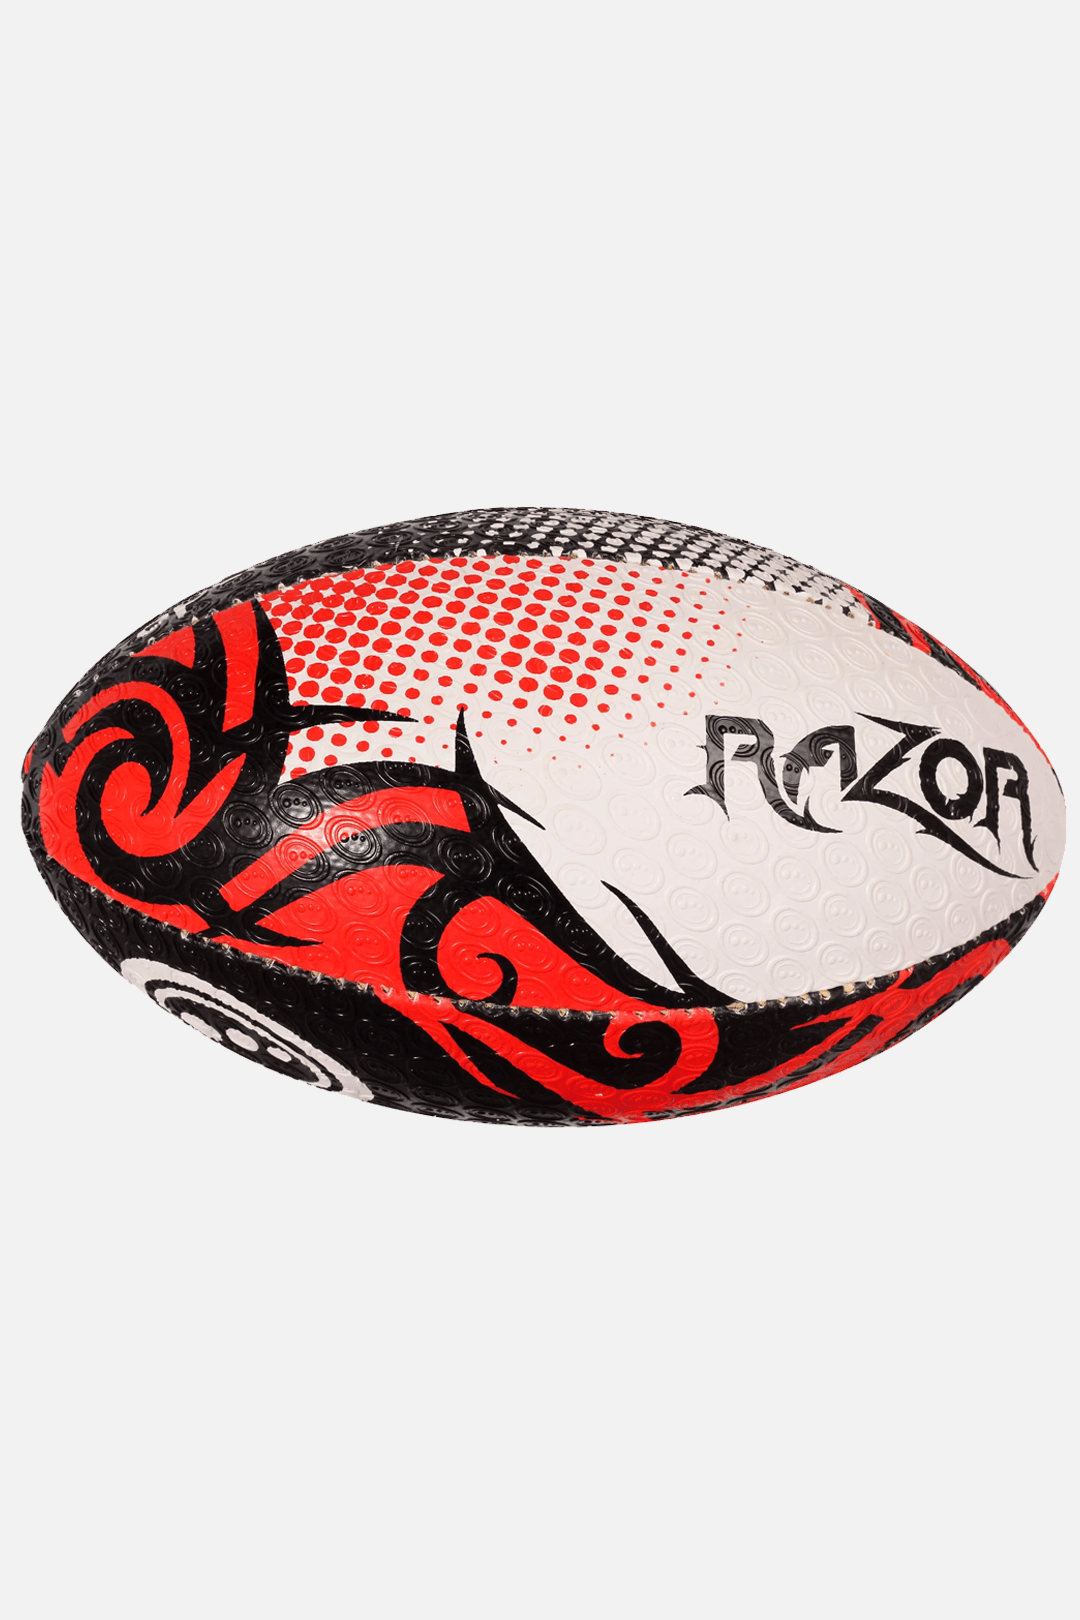 Bulk Razor Rugby Ball Red - 10/20/30 Pack - Free Carrier and Pump - Optimum